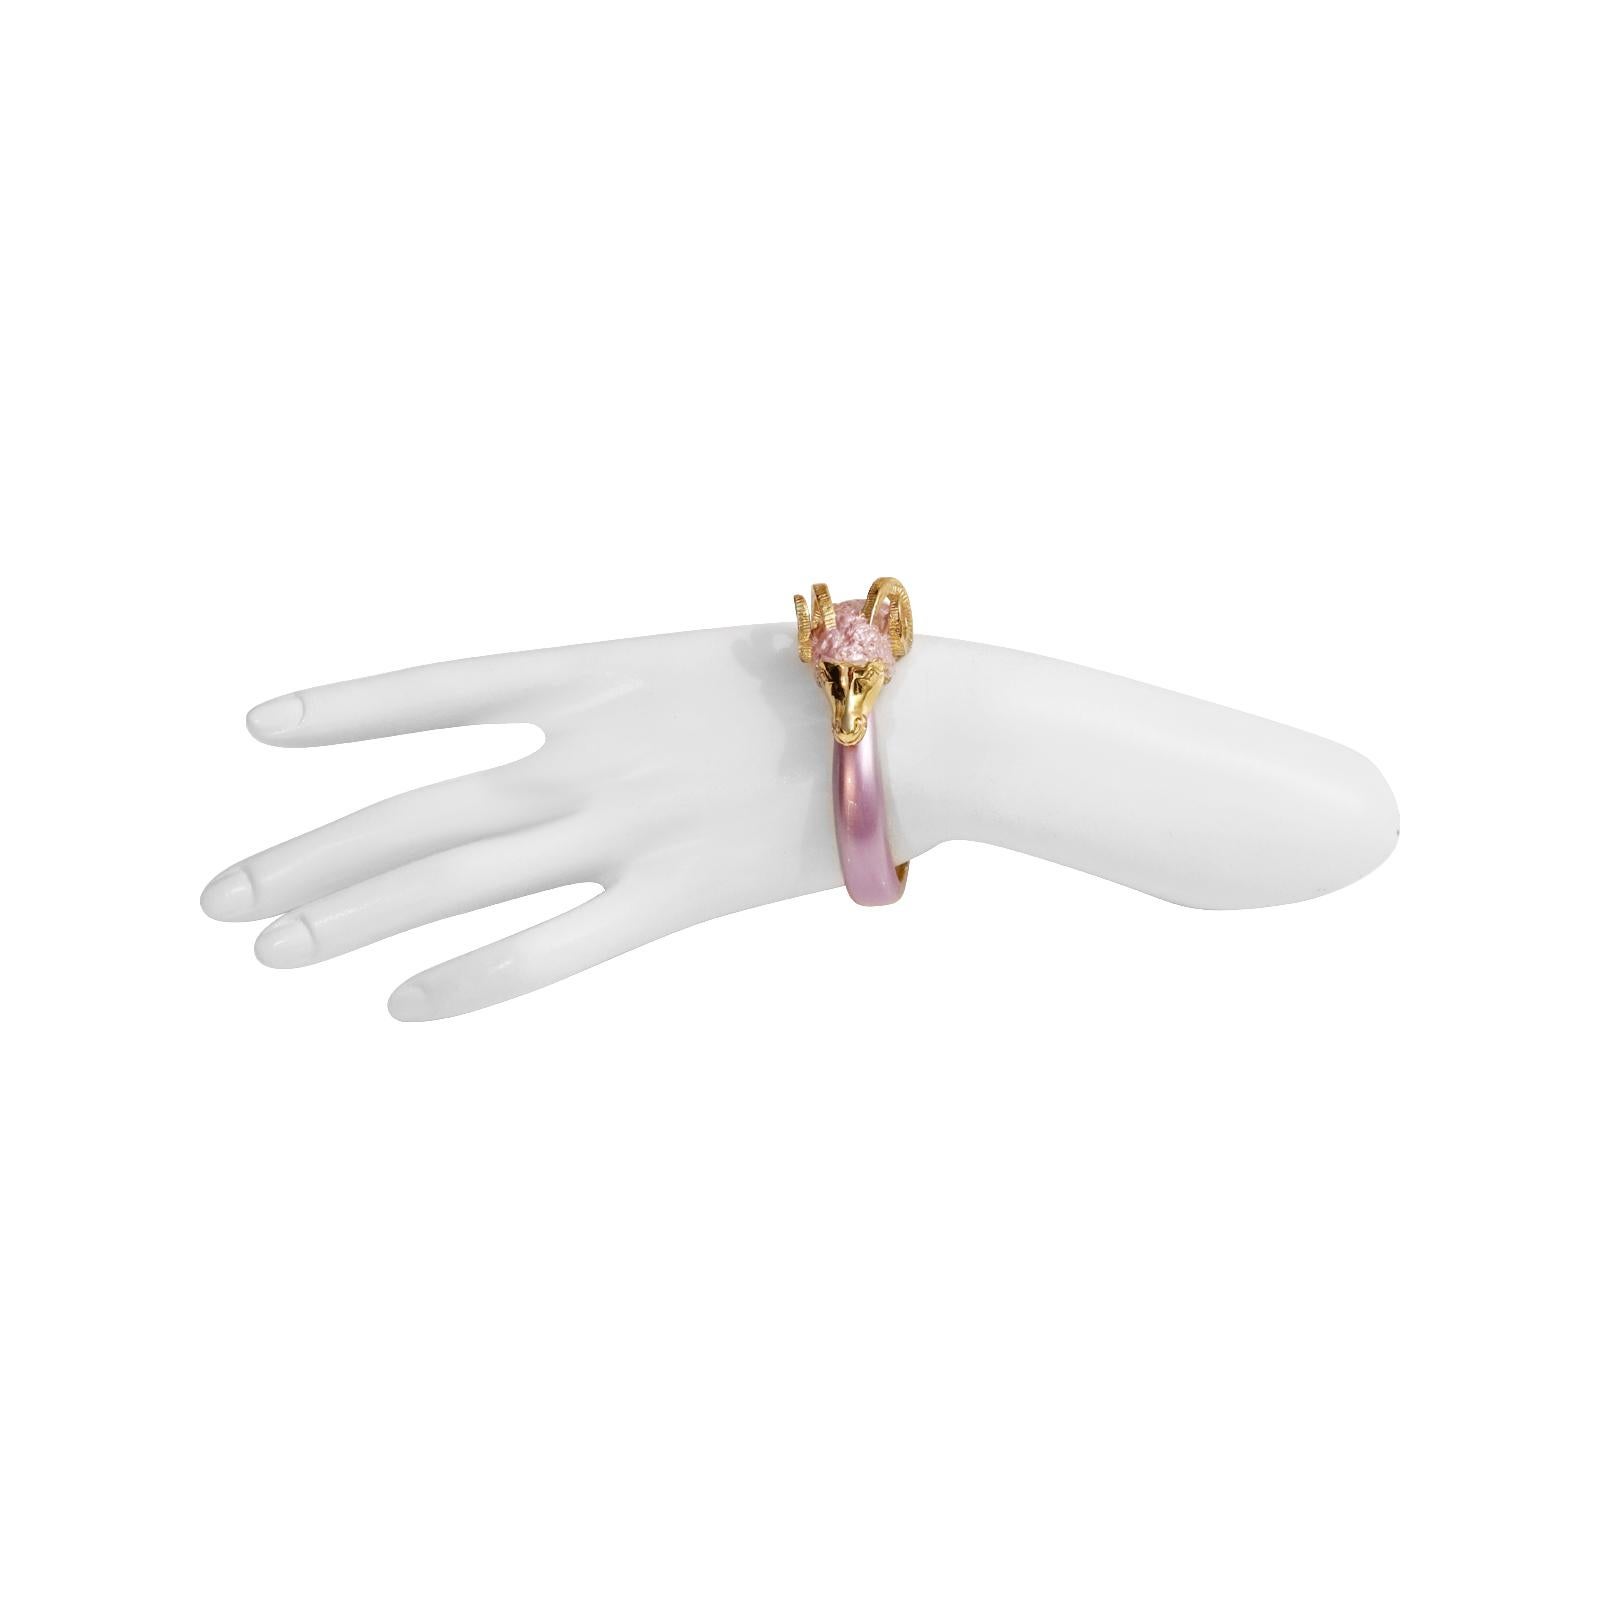 Vintage Carolee Gold Tone and Pink Rams Head Bracelet, Circa 1980s For Sale 2